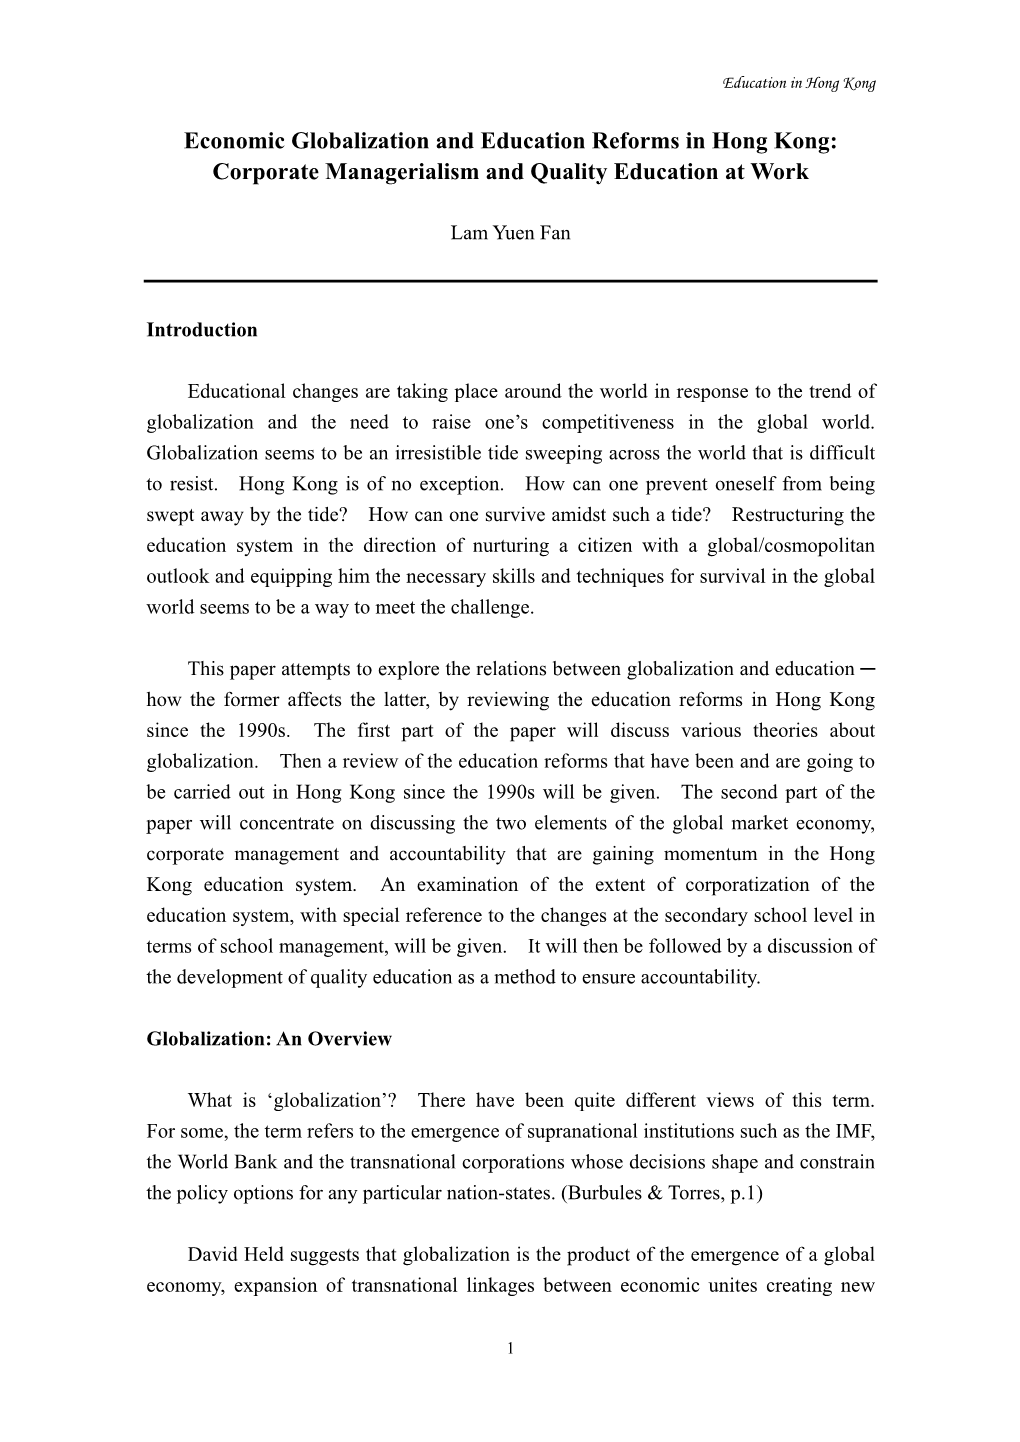 Economic Globalization and Education Reforms in Hong Kong: Corporate Managerialism and Quality Education at Work